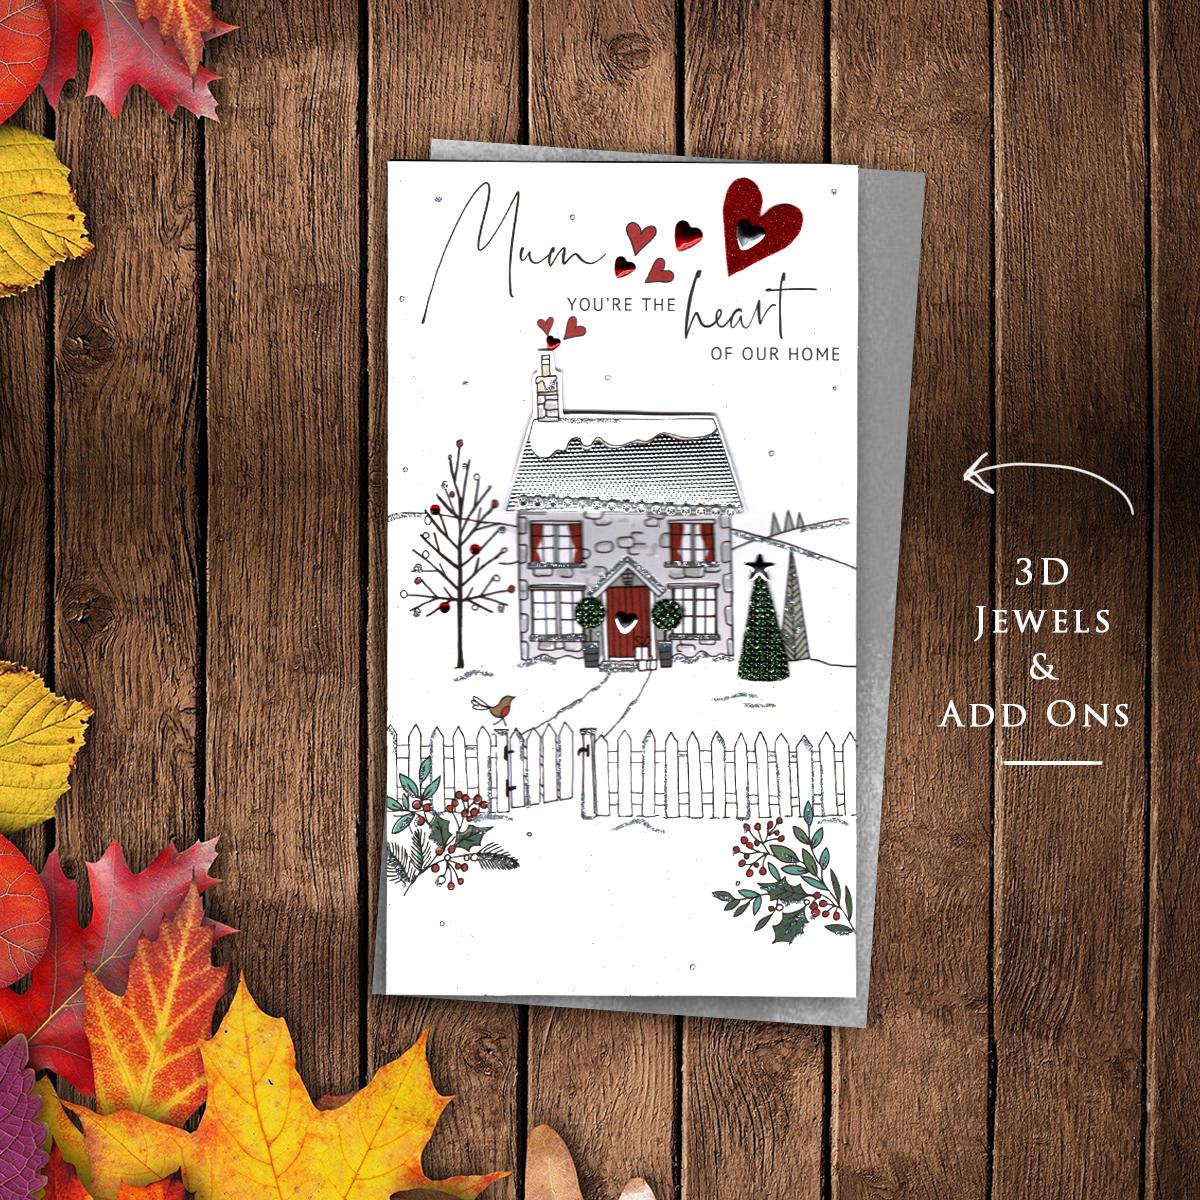 Mum You're The Heart Of Our Home Featuring A Decoupage House With Garden And fence. Finished With Embellishments, Silver Sparkle And Silver Envelope